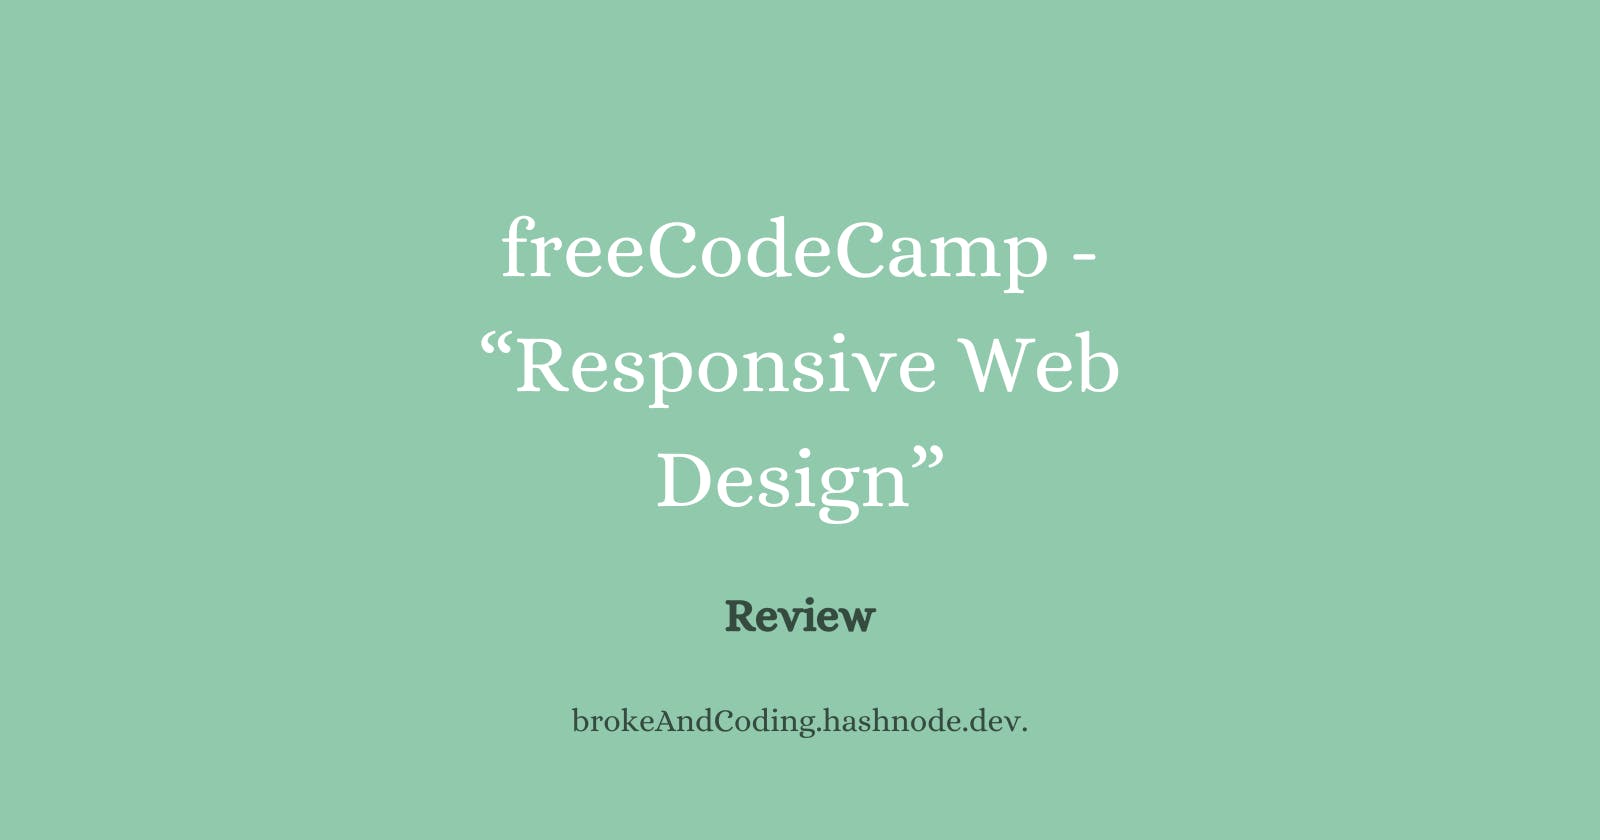 FreeCodeCamp - Review